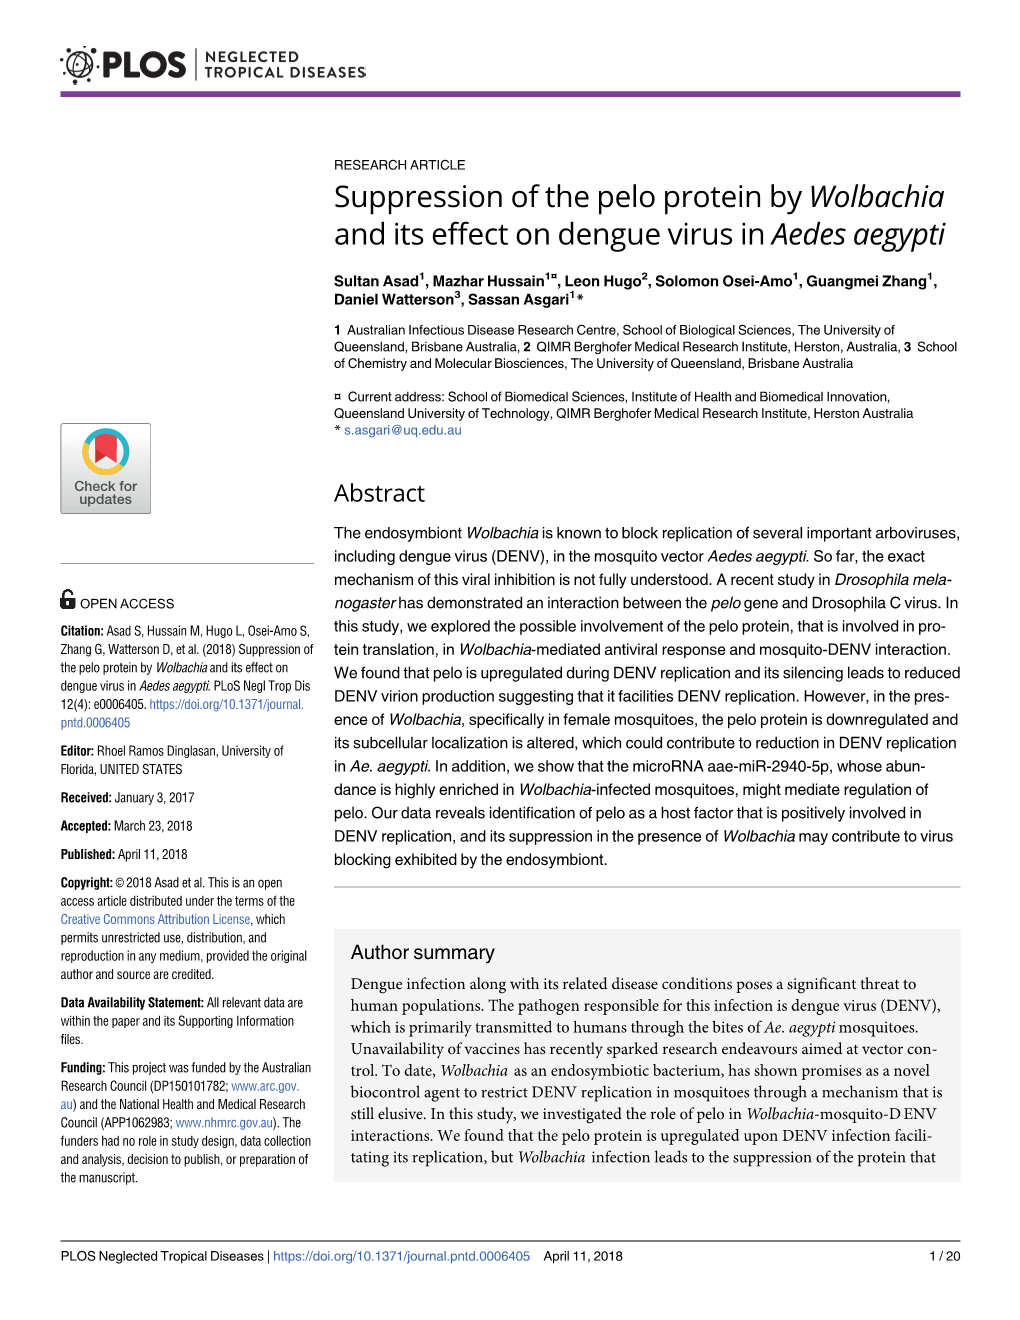 Suppression of the Pelo Protein by Wolbachia and Its Effect on Dengue Virus in Aedes Aegypti